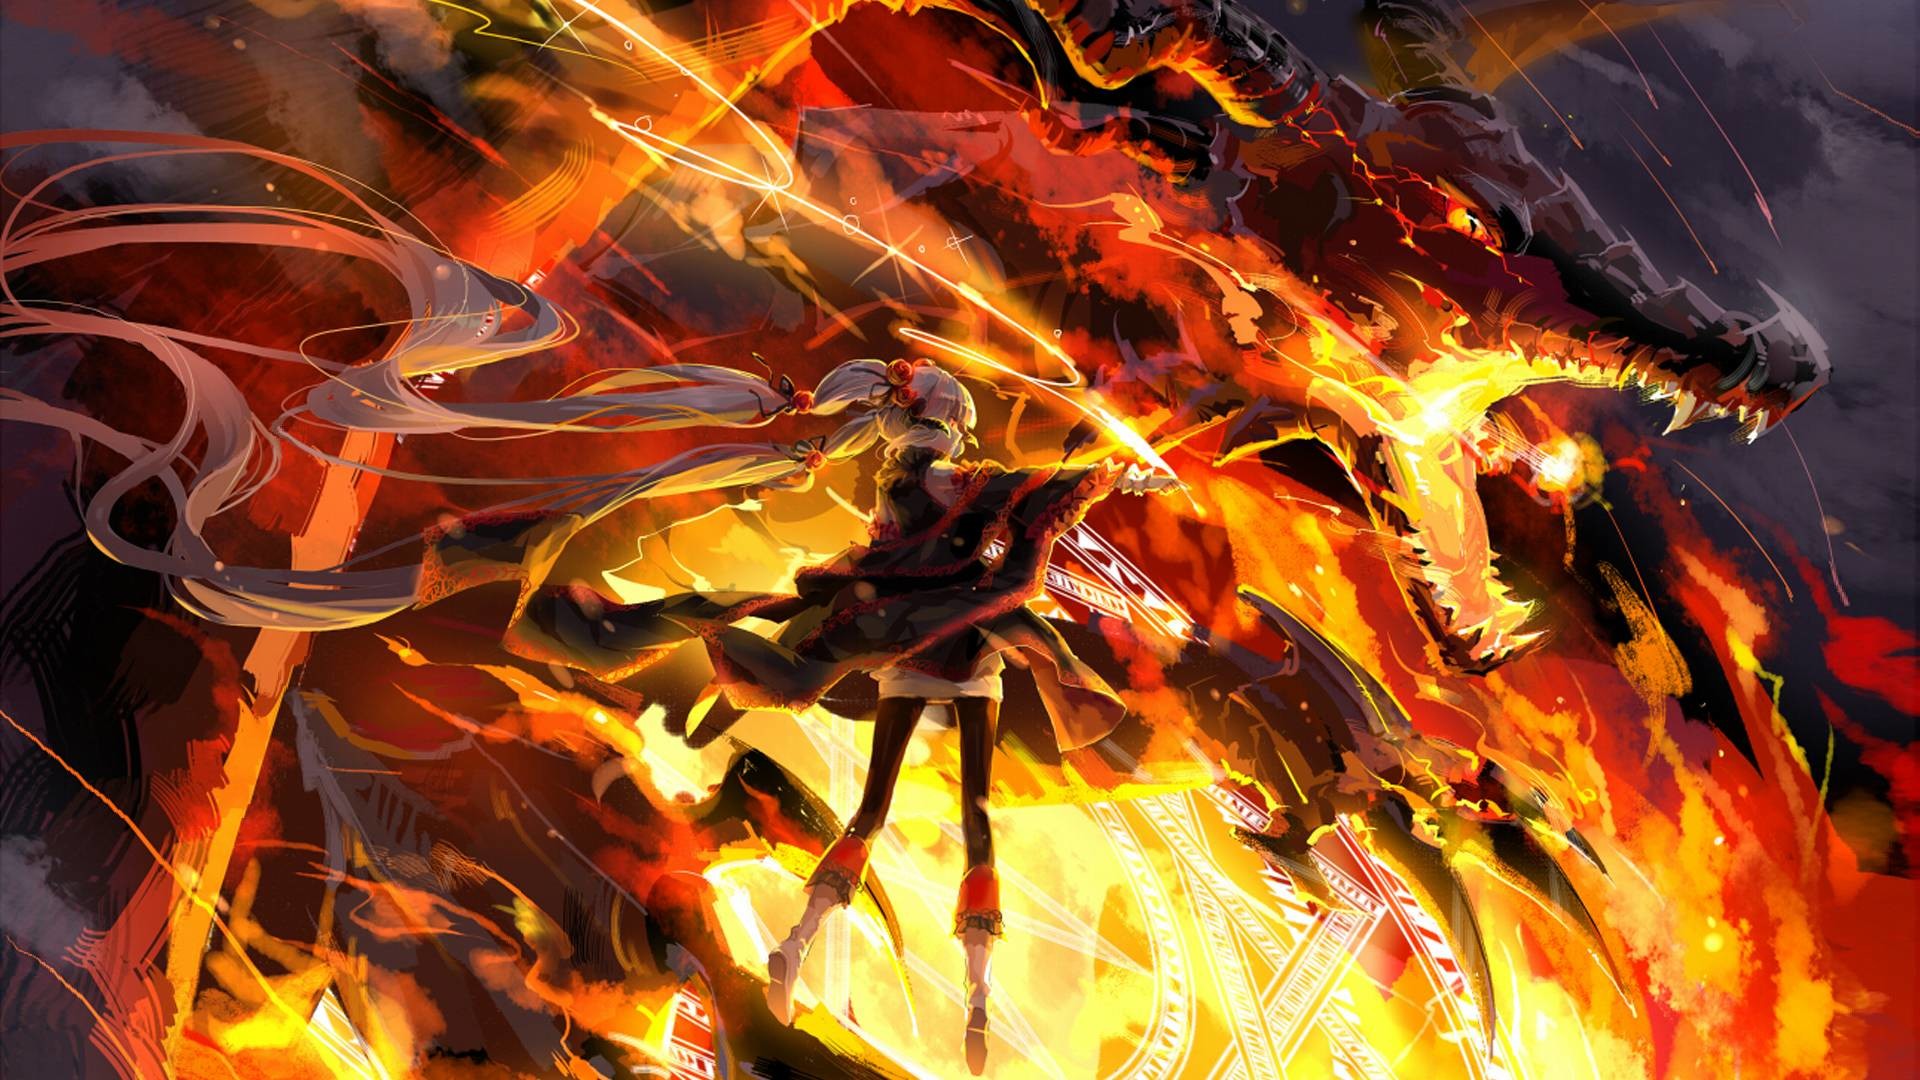 1920x1080 Fire Dragon Backgrounds For Free Wallpaper